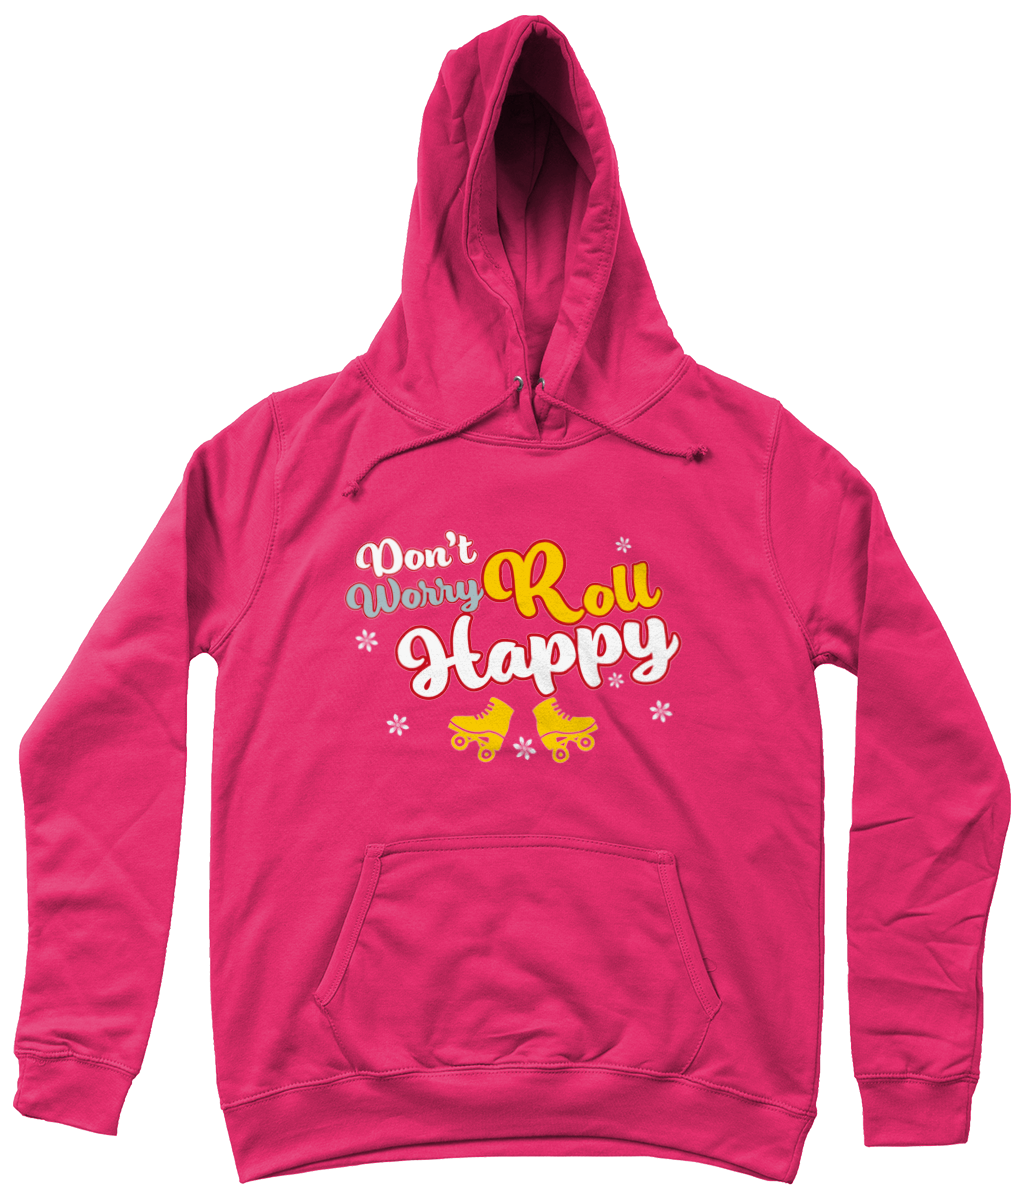 Girlie College Hoodie rollhappy yellow-white